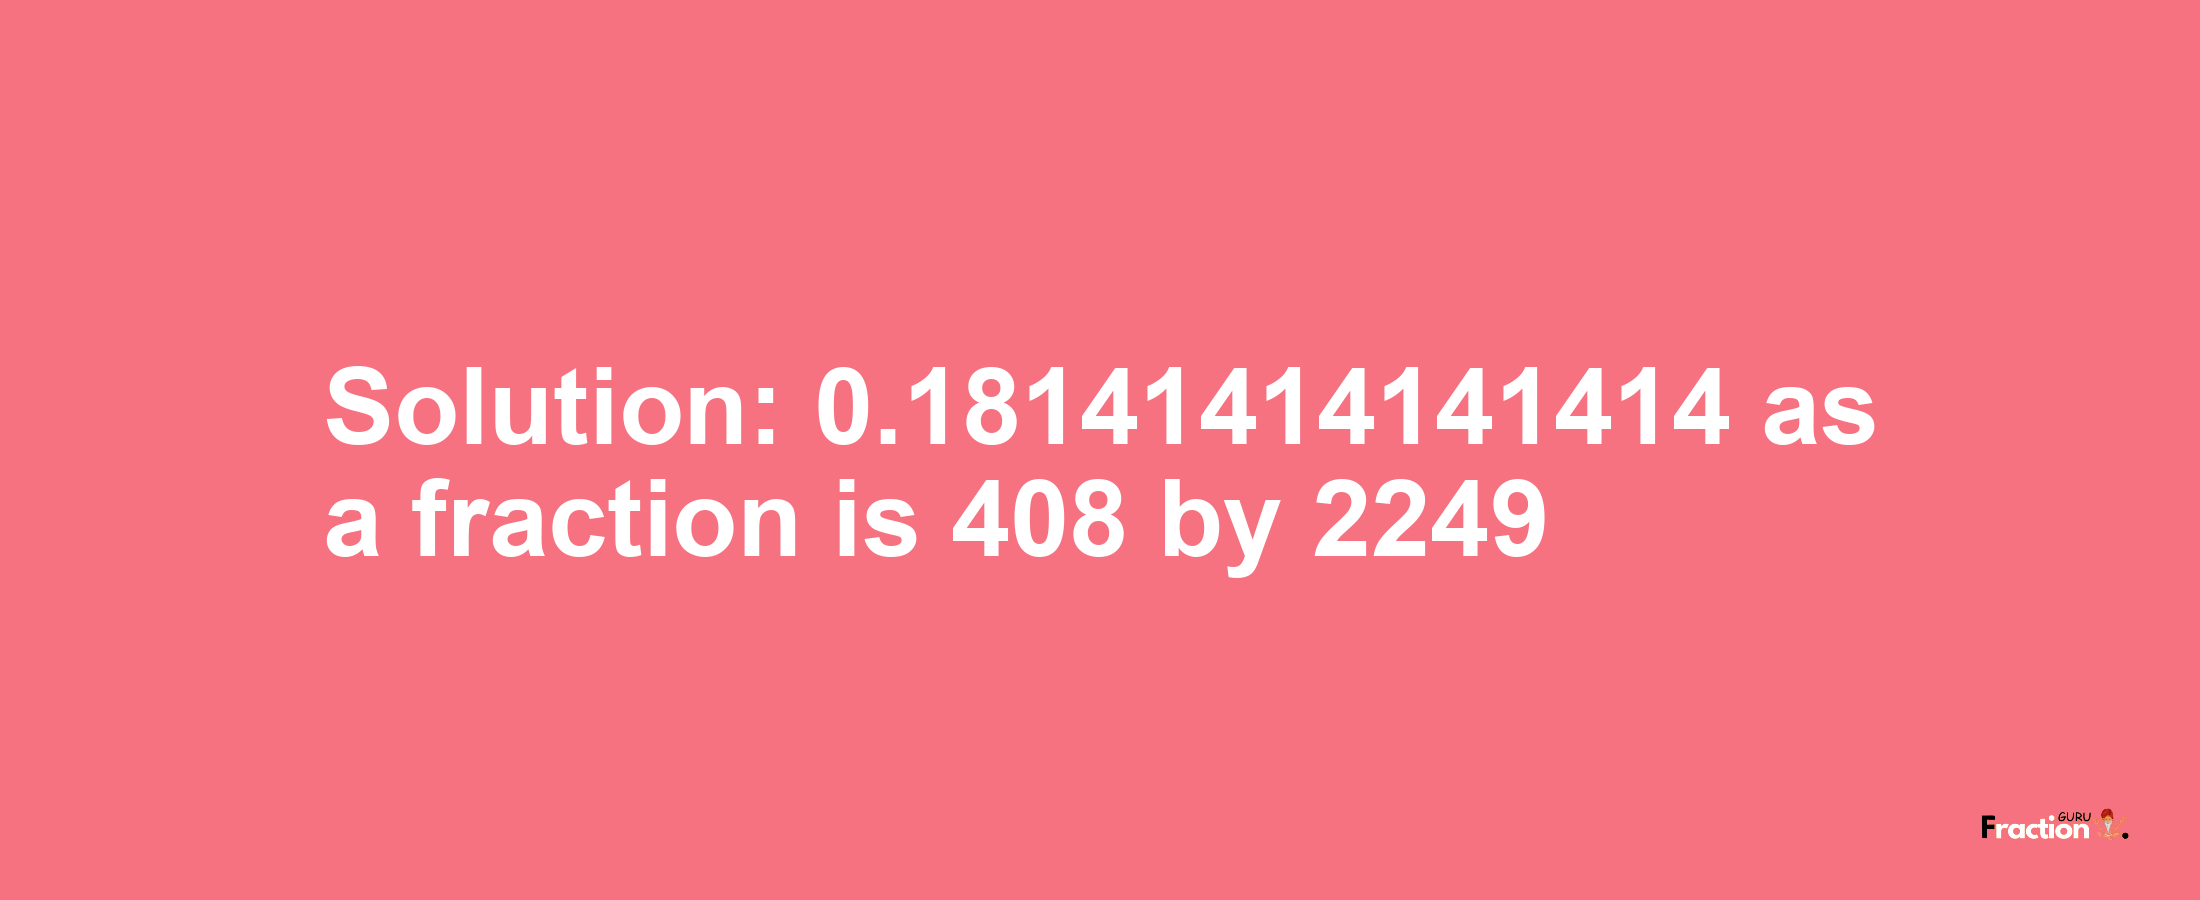 Solution:0.18141414141414 as a fraction is 408/2249